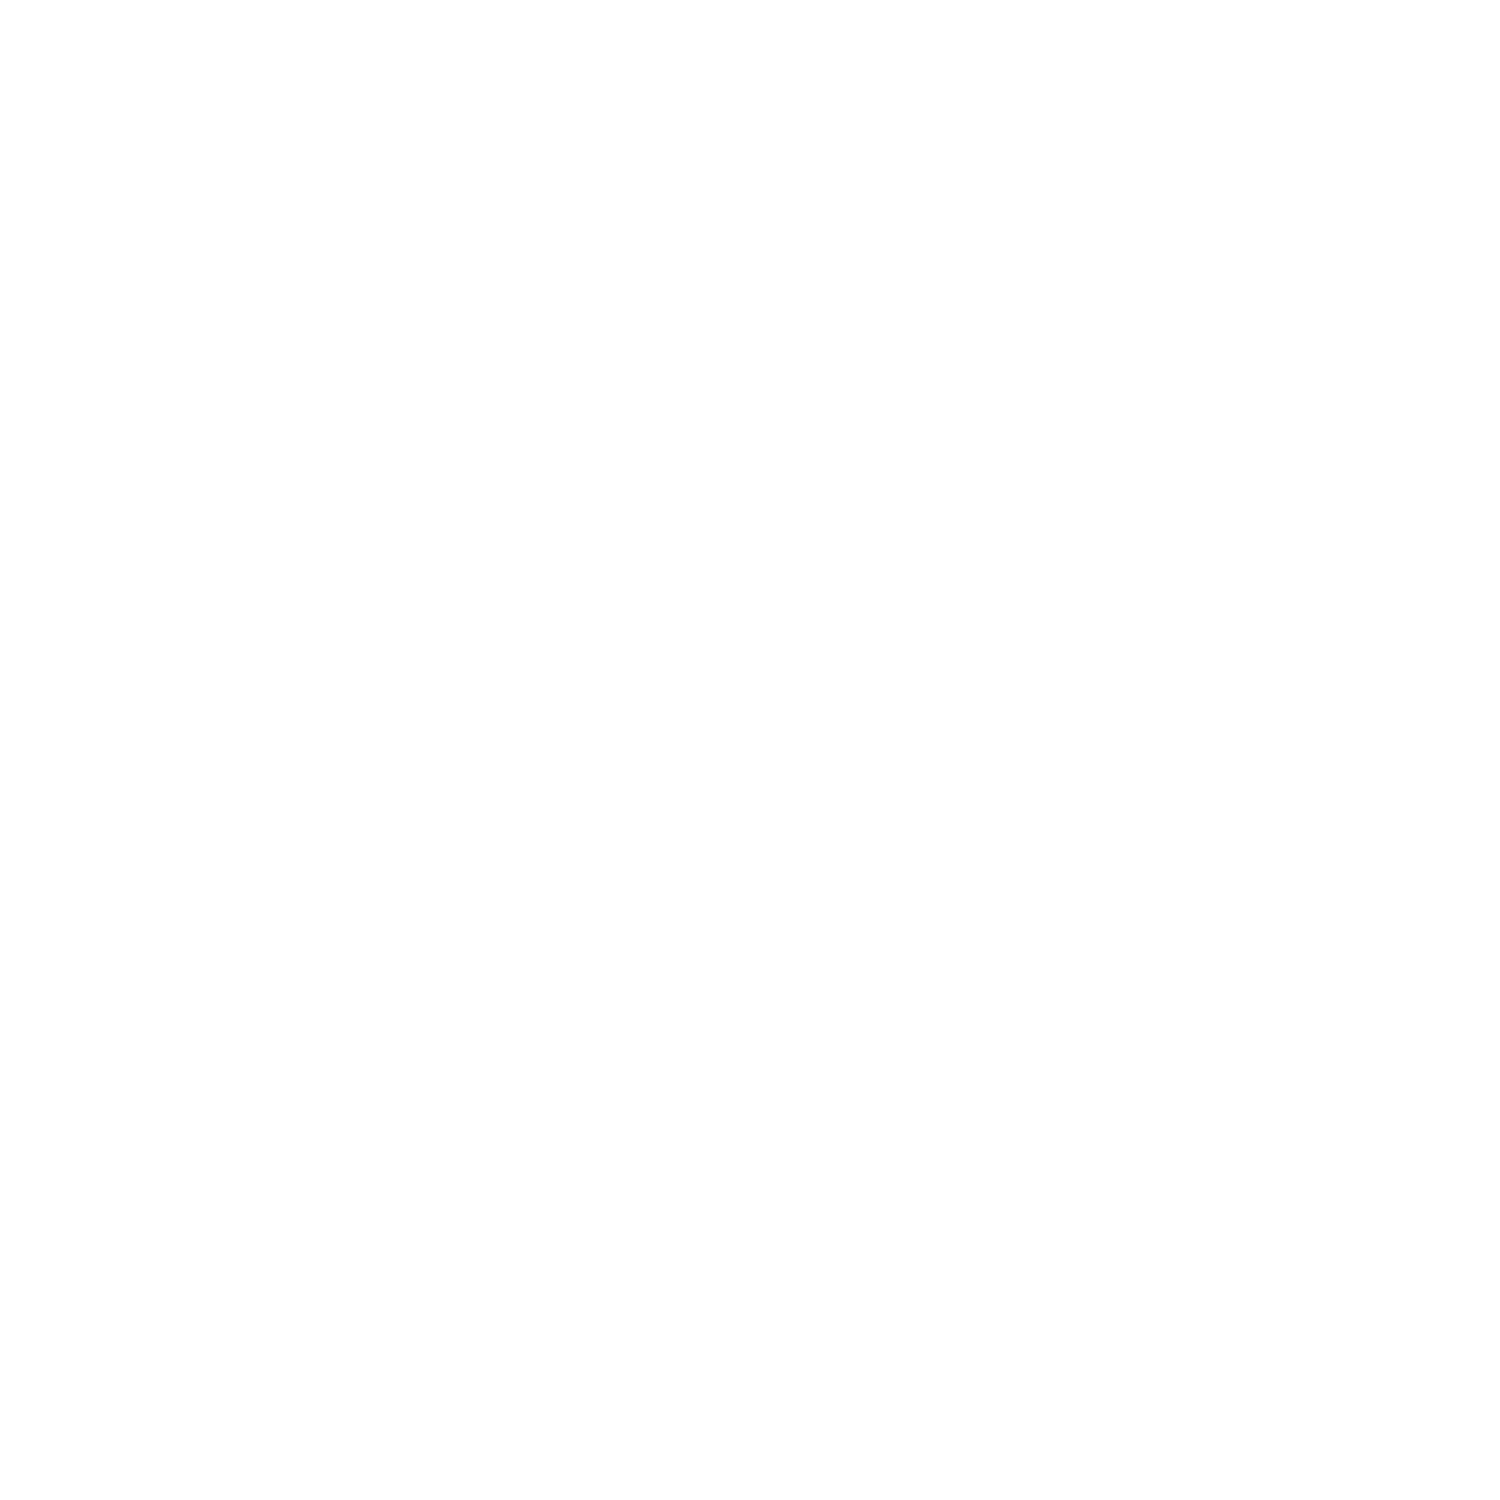 Up North Outdoor Services, LLC